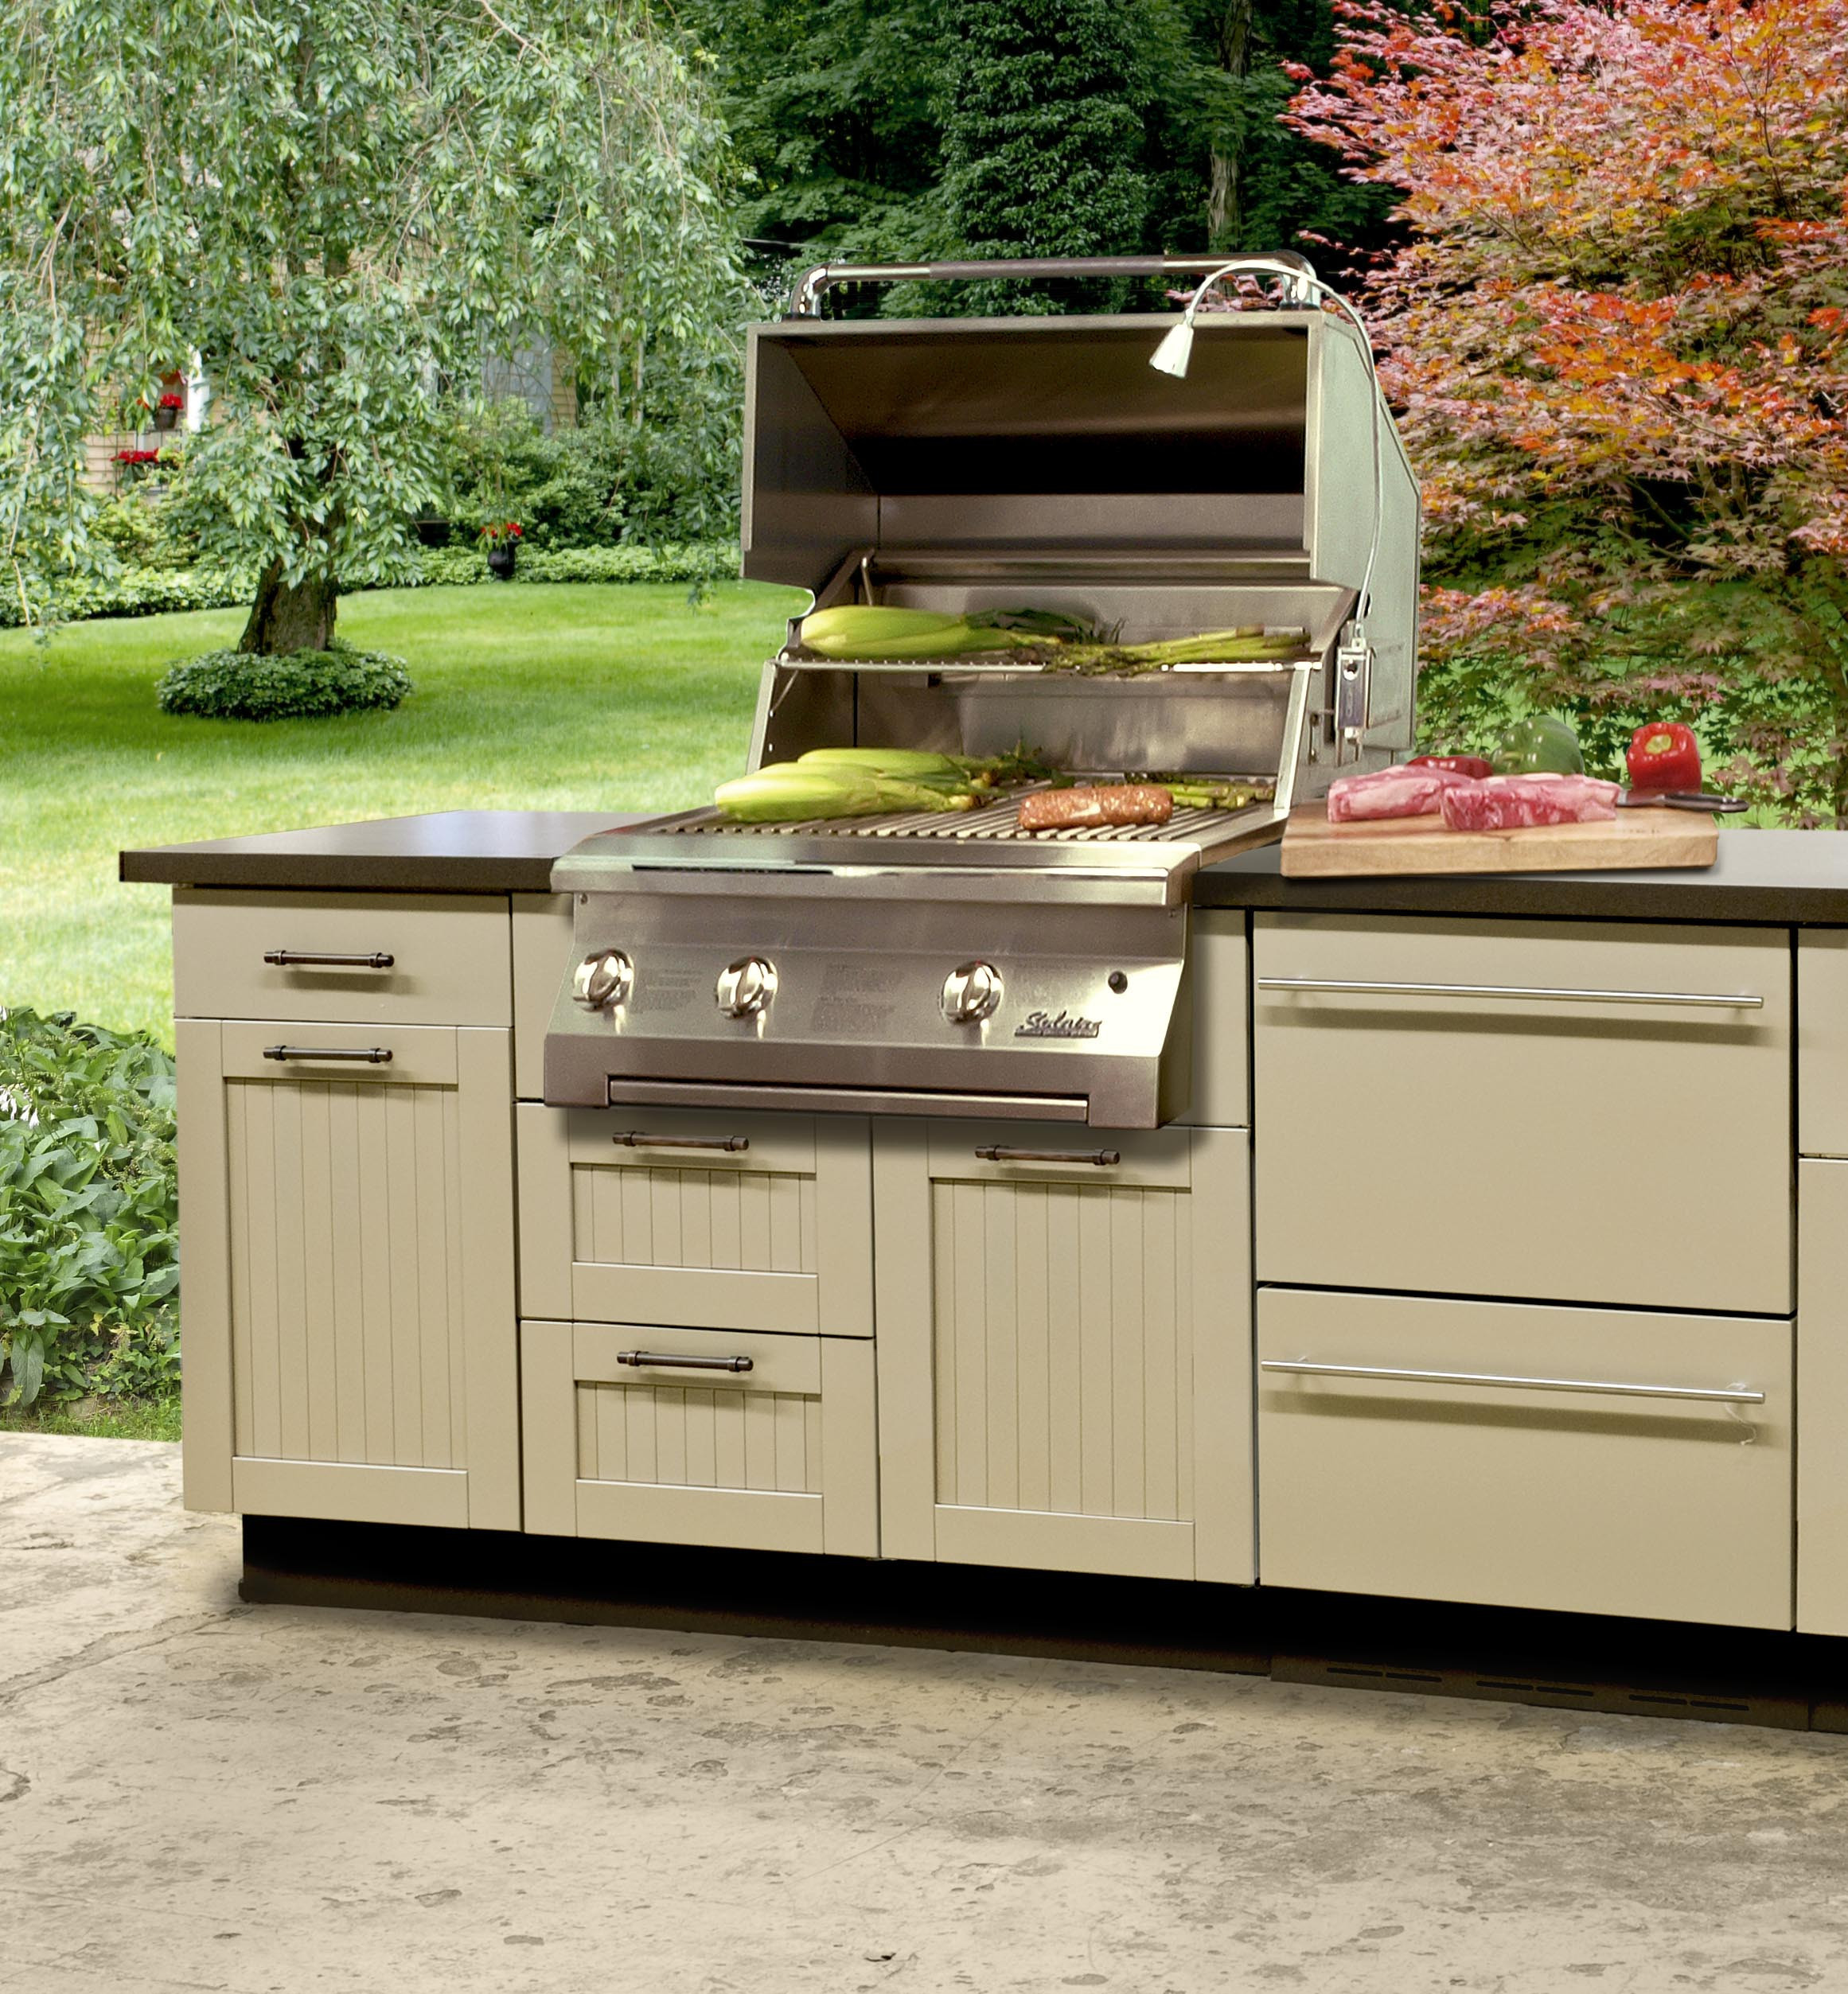 Outdoor Kitchen Lowes
 The Best Ideas for Lowes Outdoor Kitchen Home